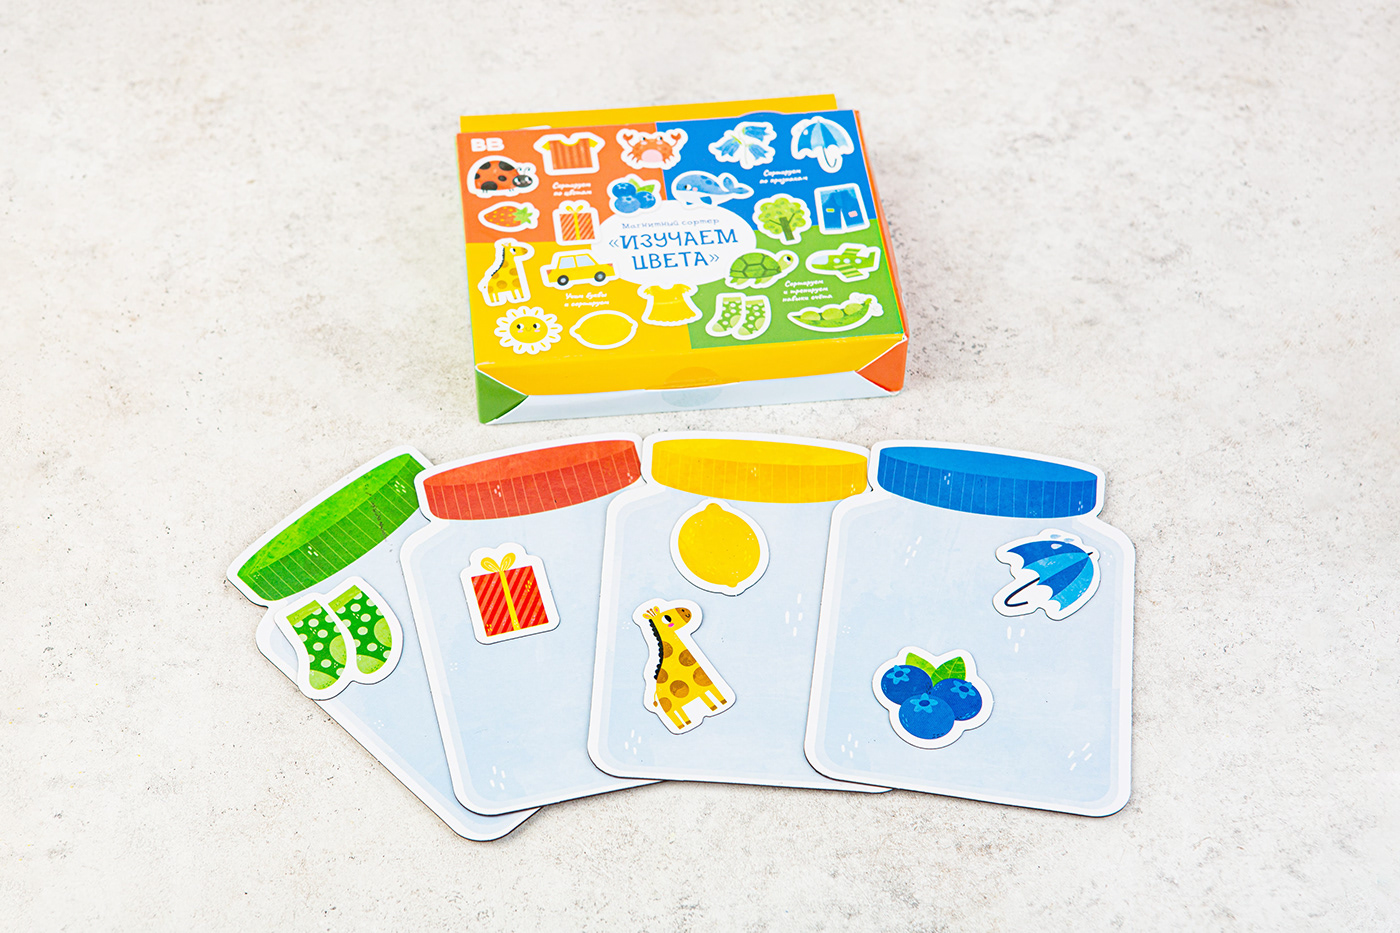 I came up with illustrations and packaging design for the Color Sorter. The set includes 4 magnetic 